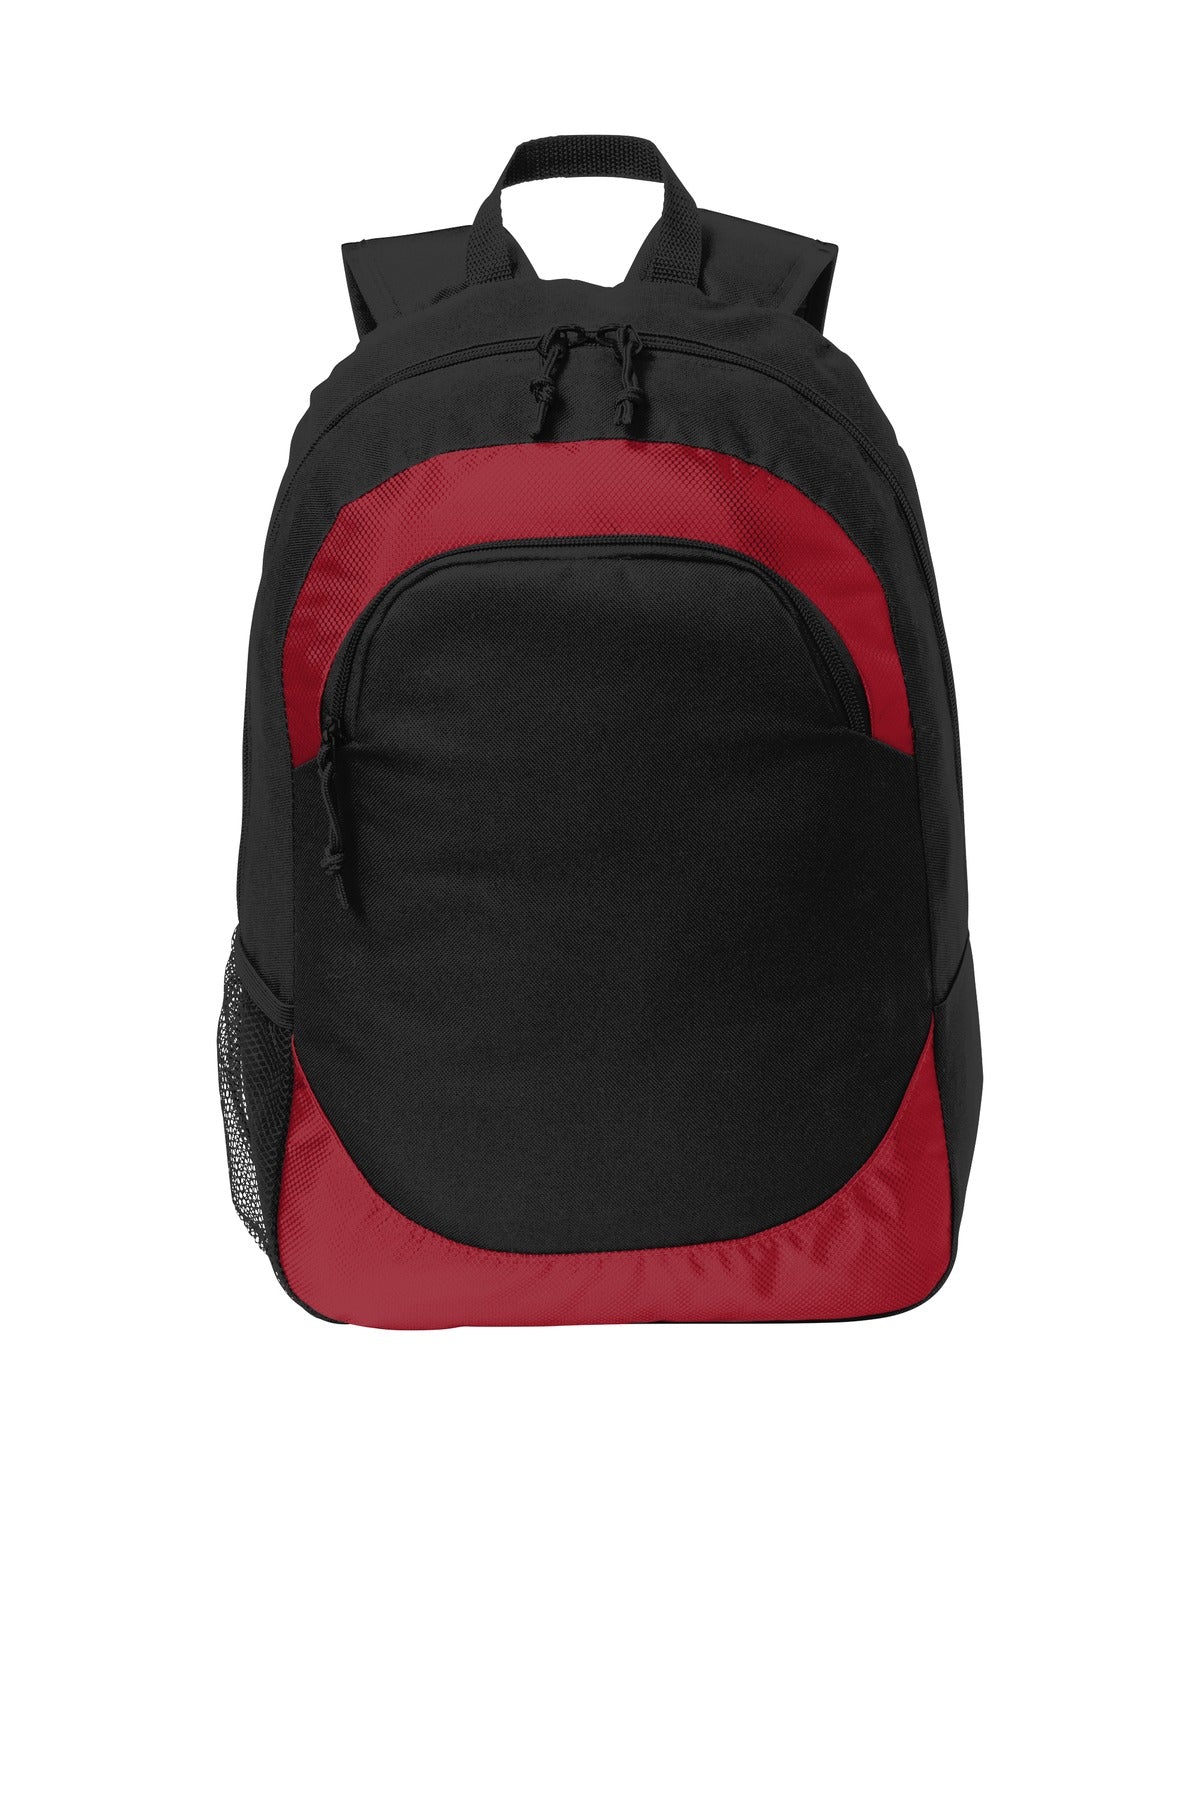 Bags Rich Red/ Black OSFA Port Authority